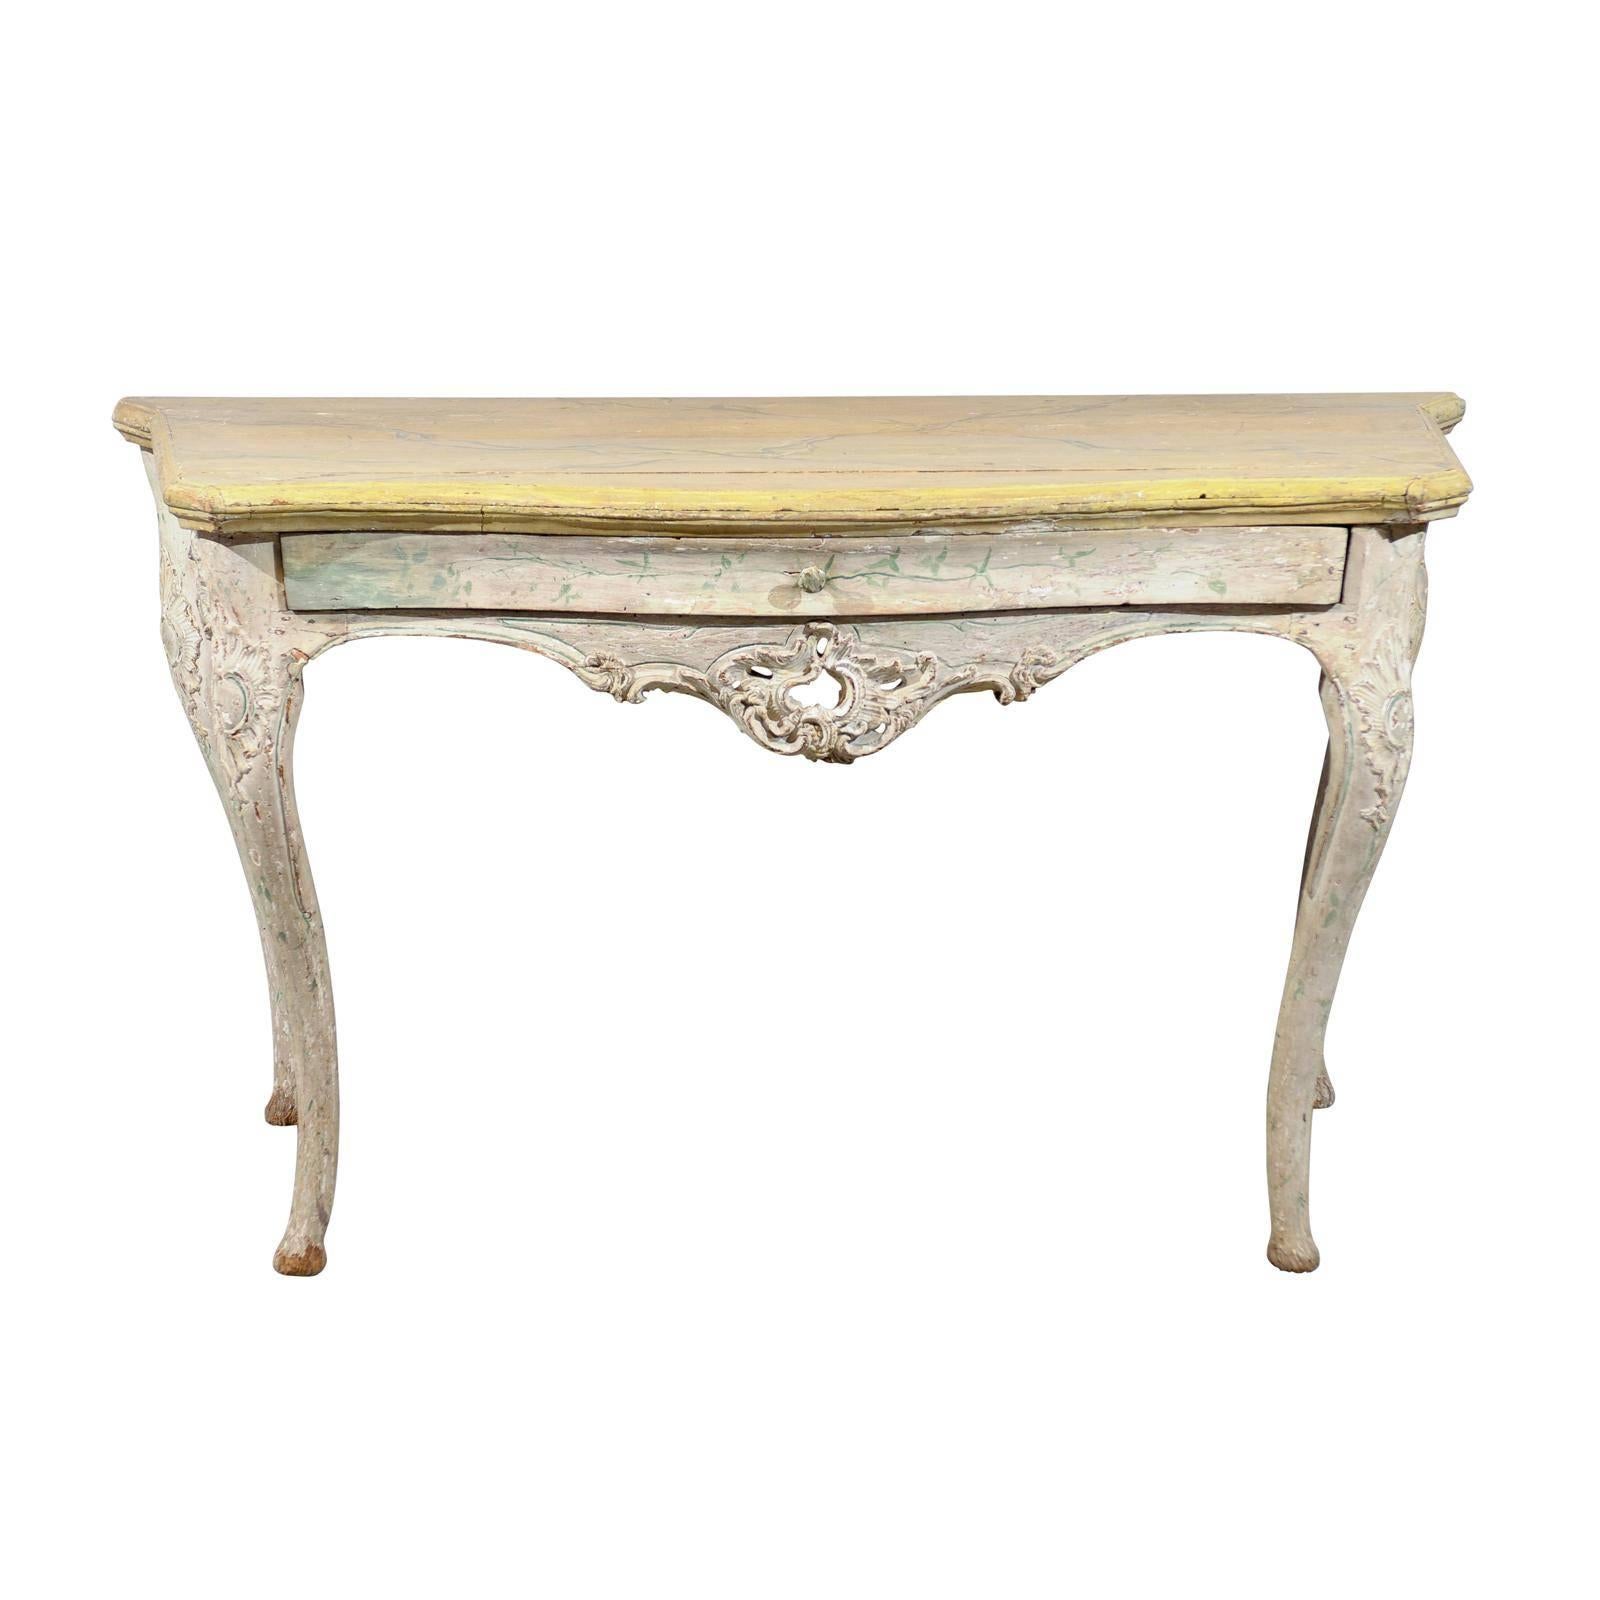 Large 18th Century Italian Rococo Painted Console with Serpentine Shape & Drawer